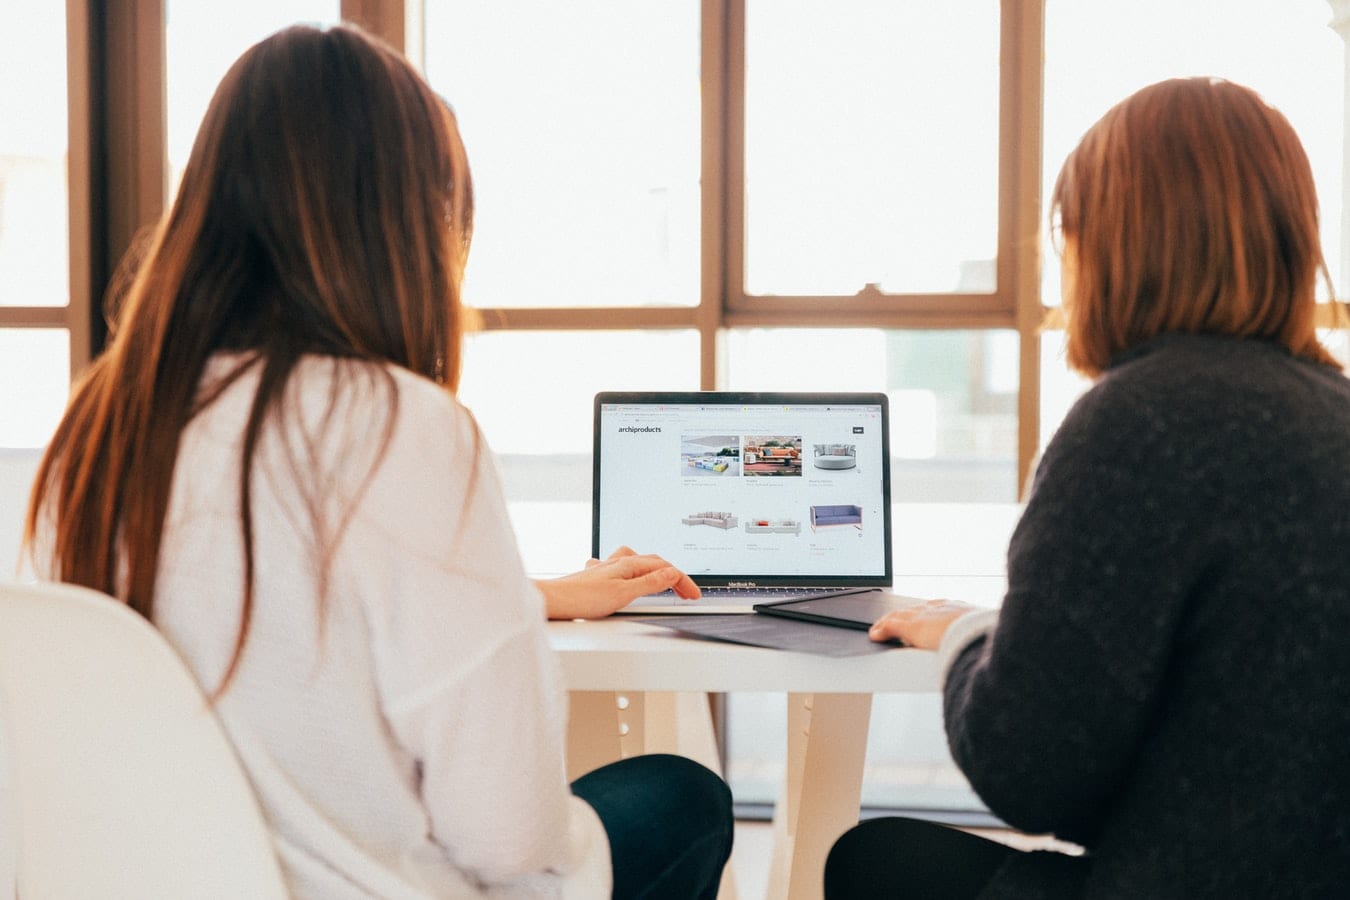 Two women side by side looking at a laptop screen representing display advertising.